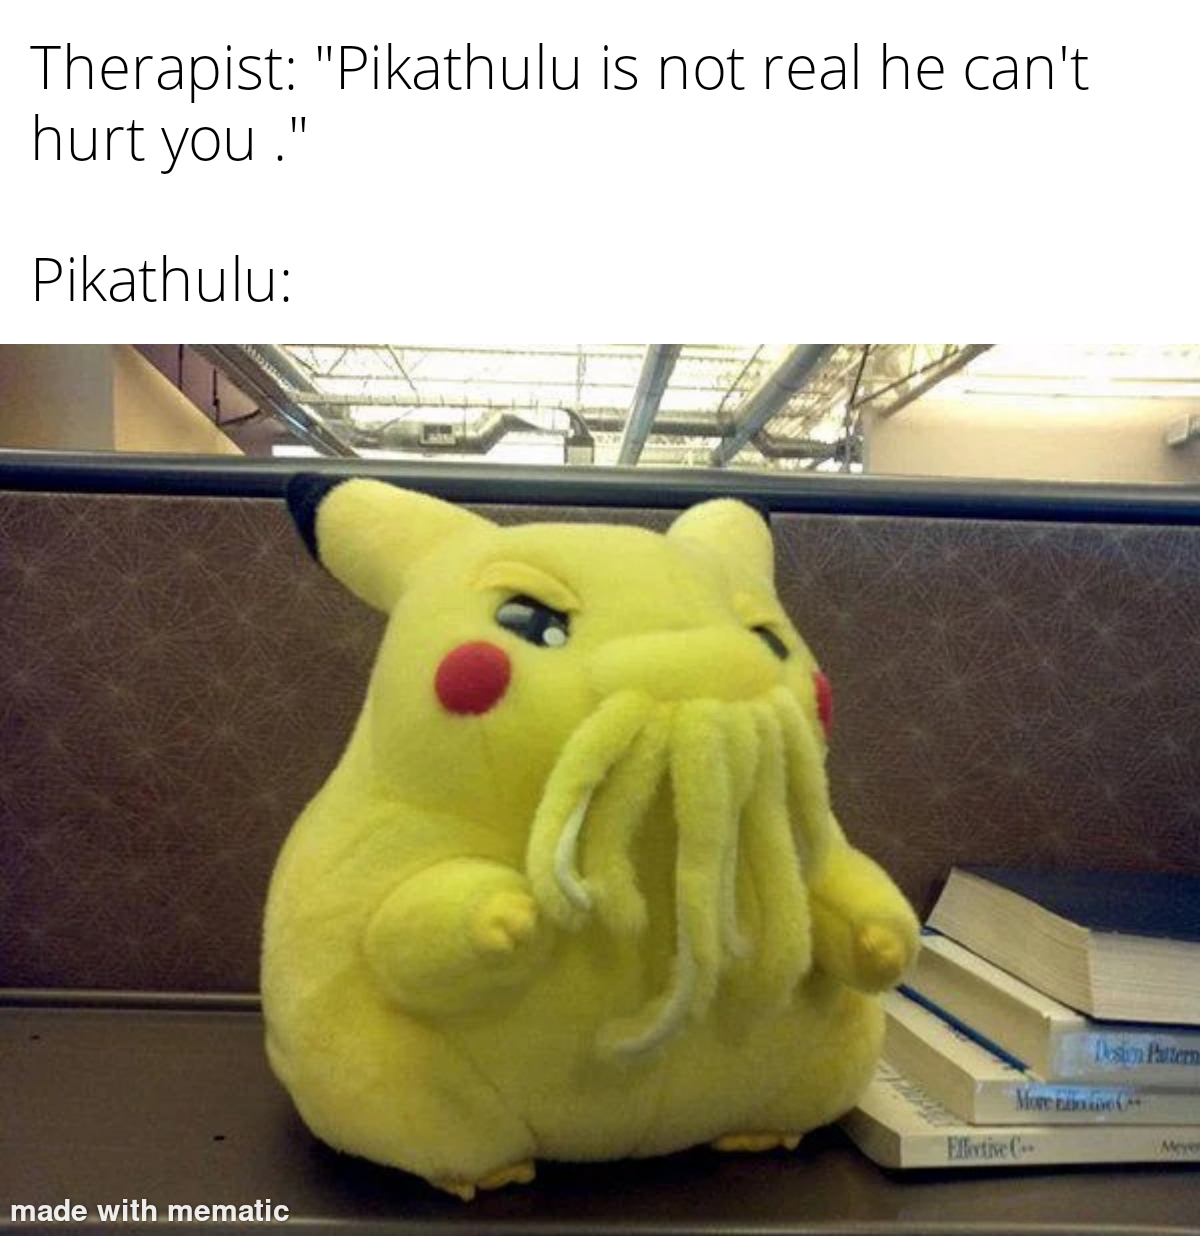 cthulhu pikachu - Therapist "Pikathulu is not real he can't hurt you." Pikathulu made with mematic